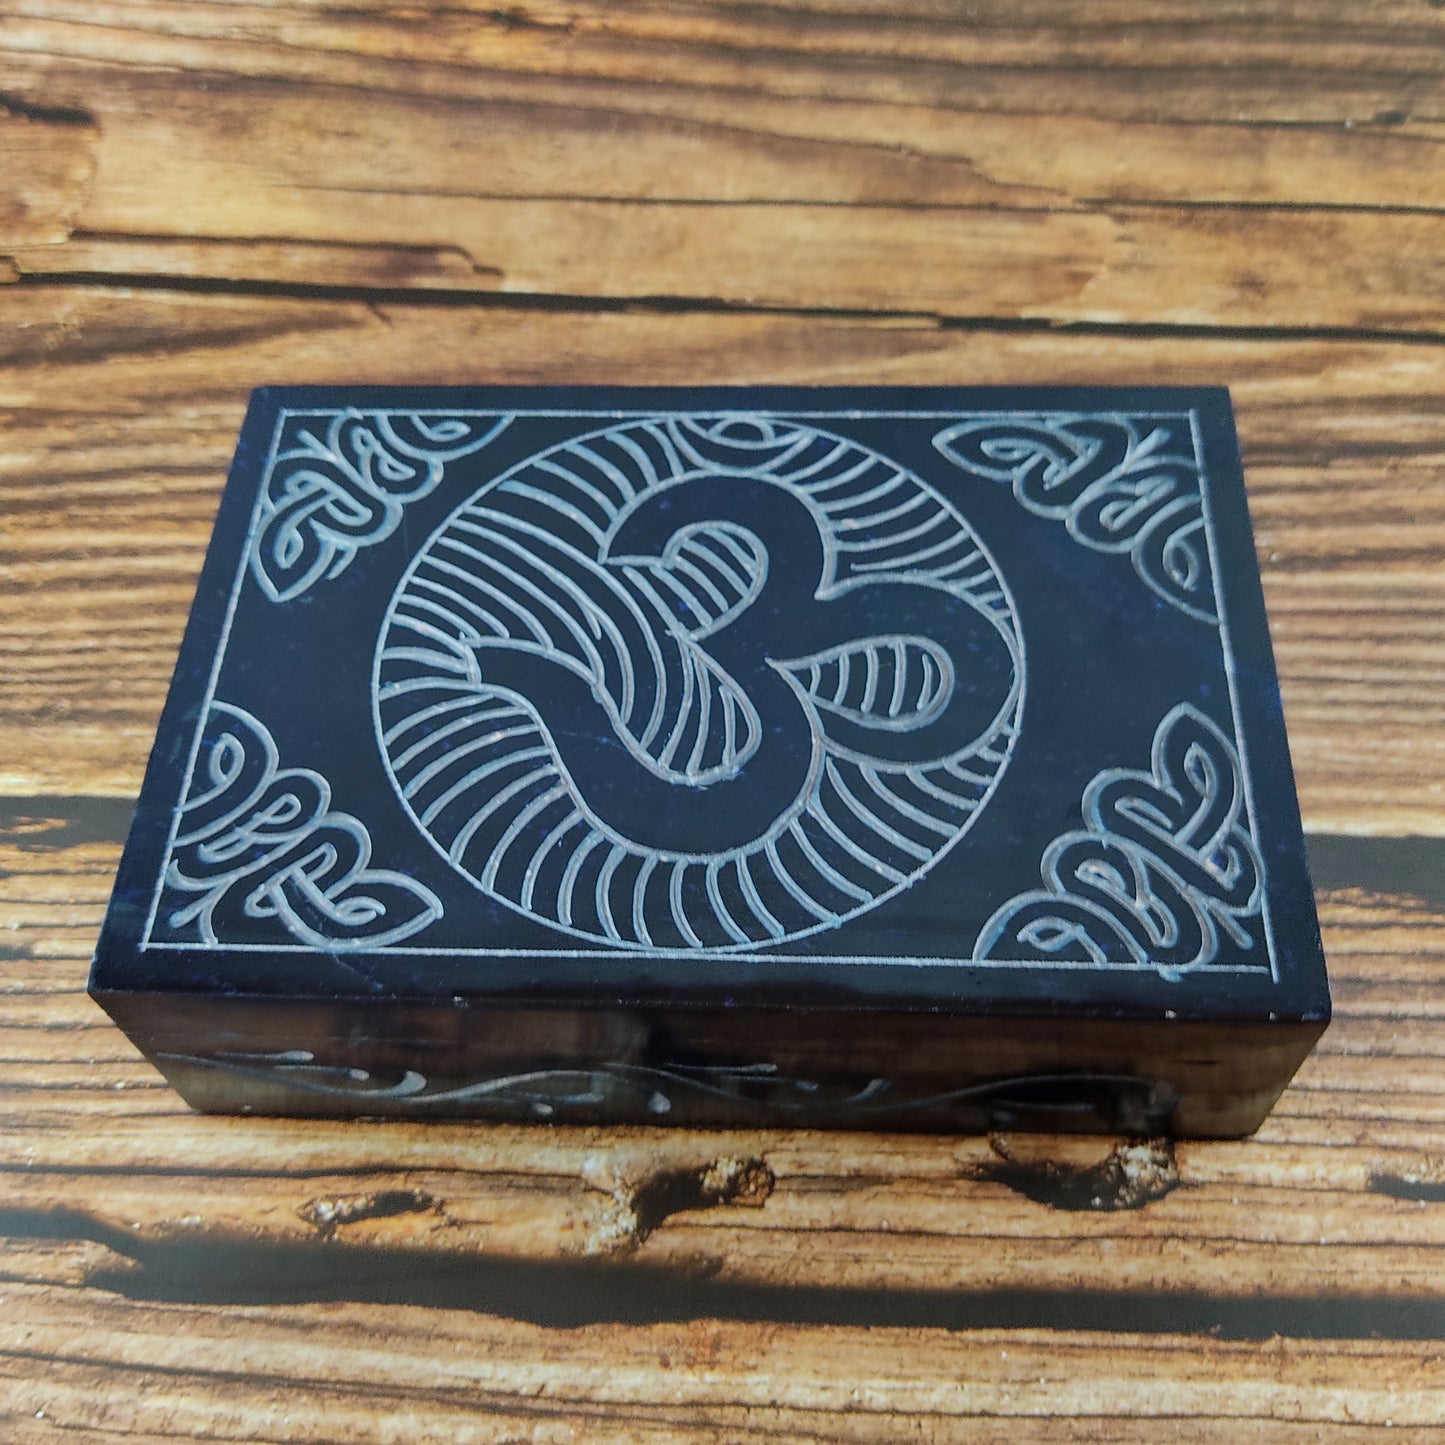 Om Symbol Hand-carved Jewelry Box Soapstone Lovely Home Decoration Gift 6"x4"